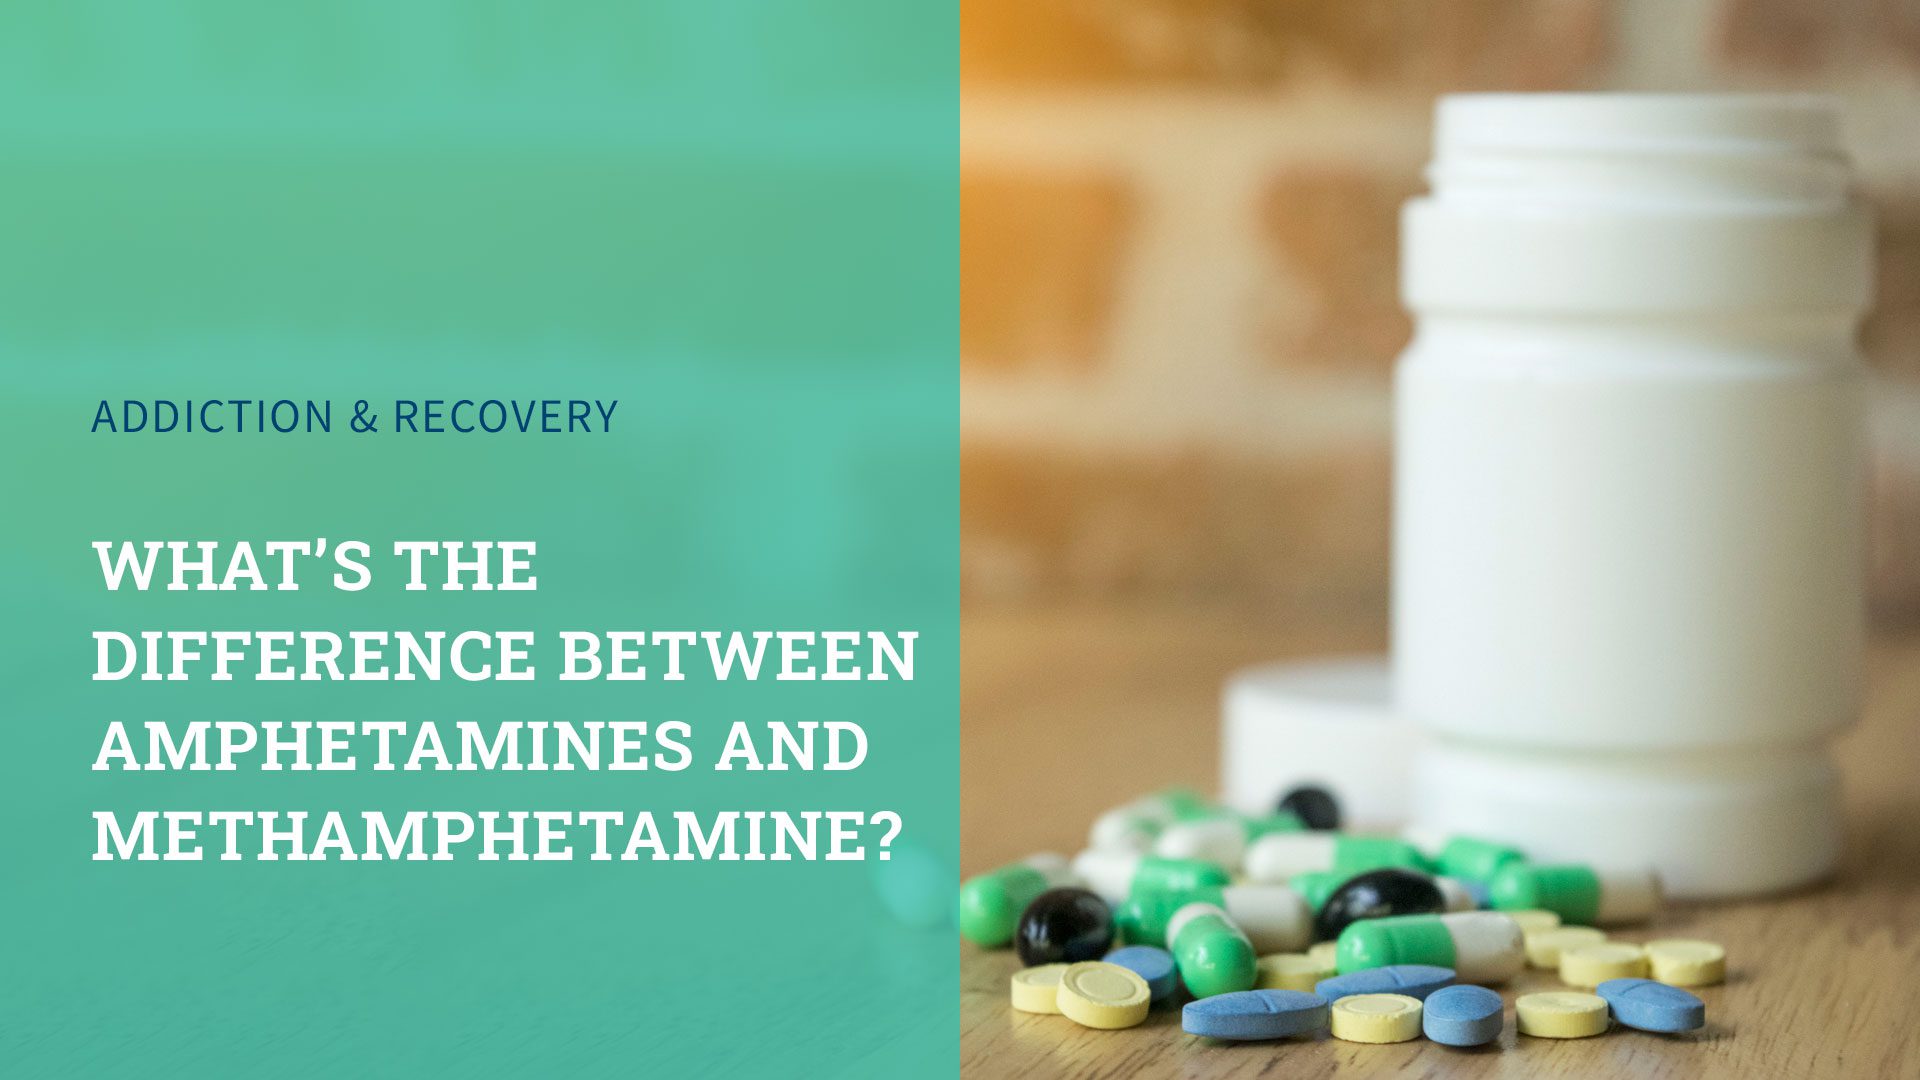 What’s the Difference Between Amphetamines and Methamphetamine?